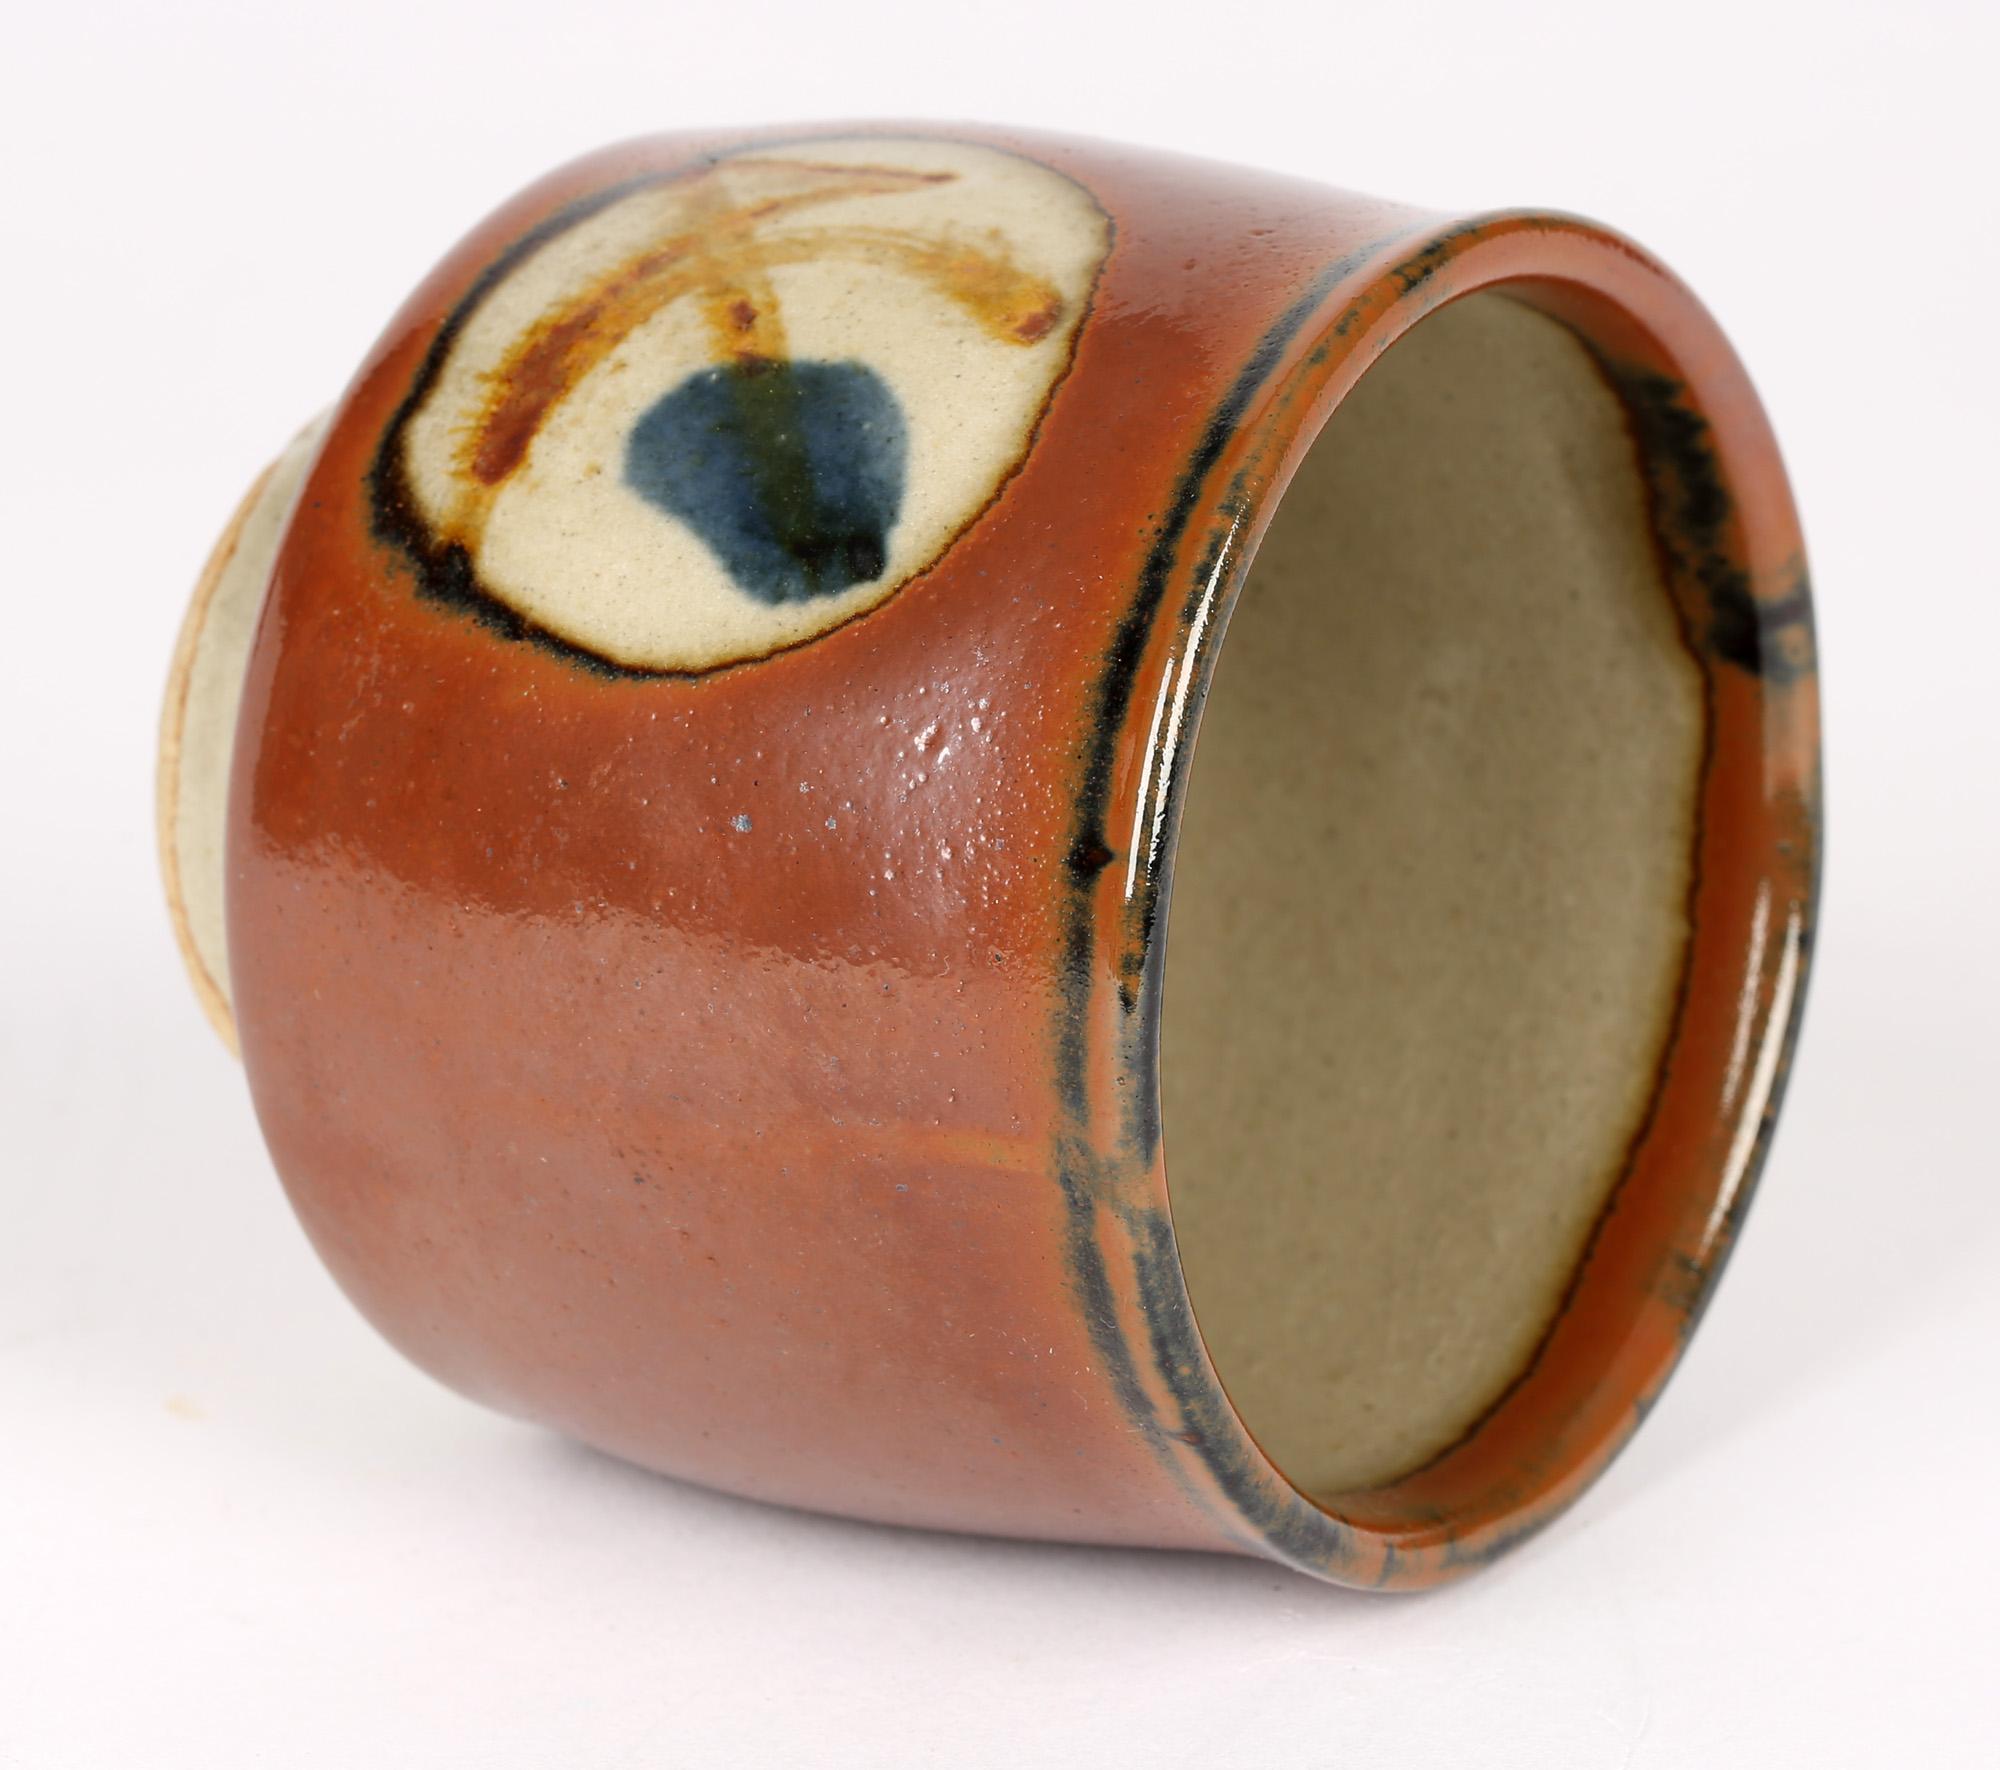 A very stylish Japanese Mashiko Yaki studio pottery Yunomi with stylized designs in panels set within a brown glazed body in the manner of Shoji Hamada and dating from around 1960. The small cylindrical shaped cup stands raised on a narrow rounded